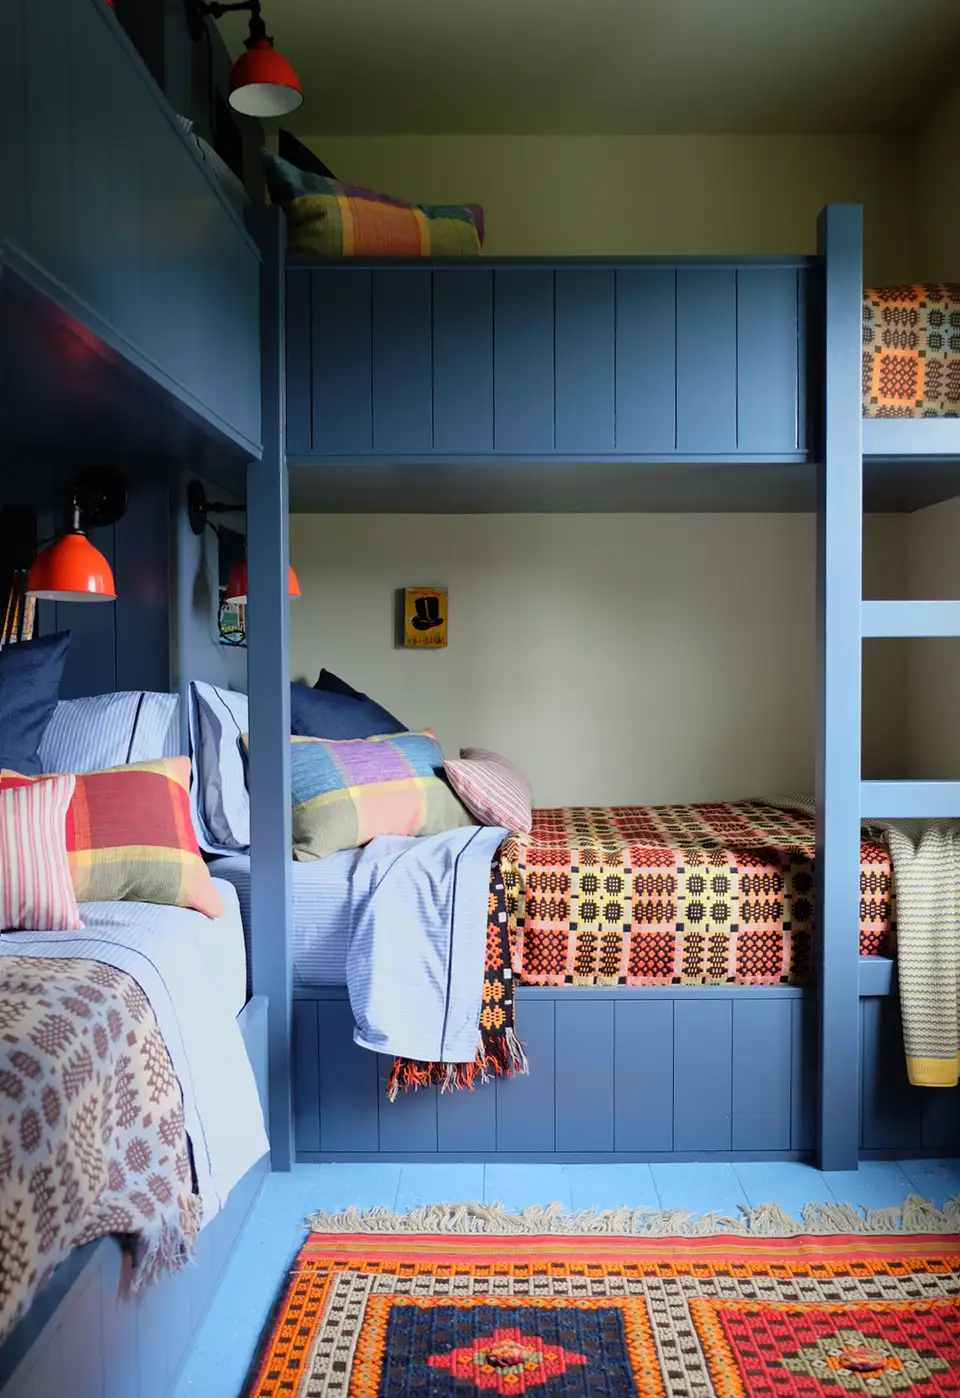 The Bunk Bed Maximizing Bedroom Space with Clever Furniture solutions